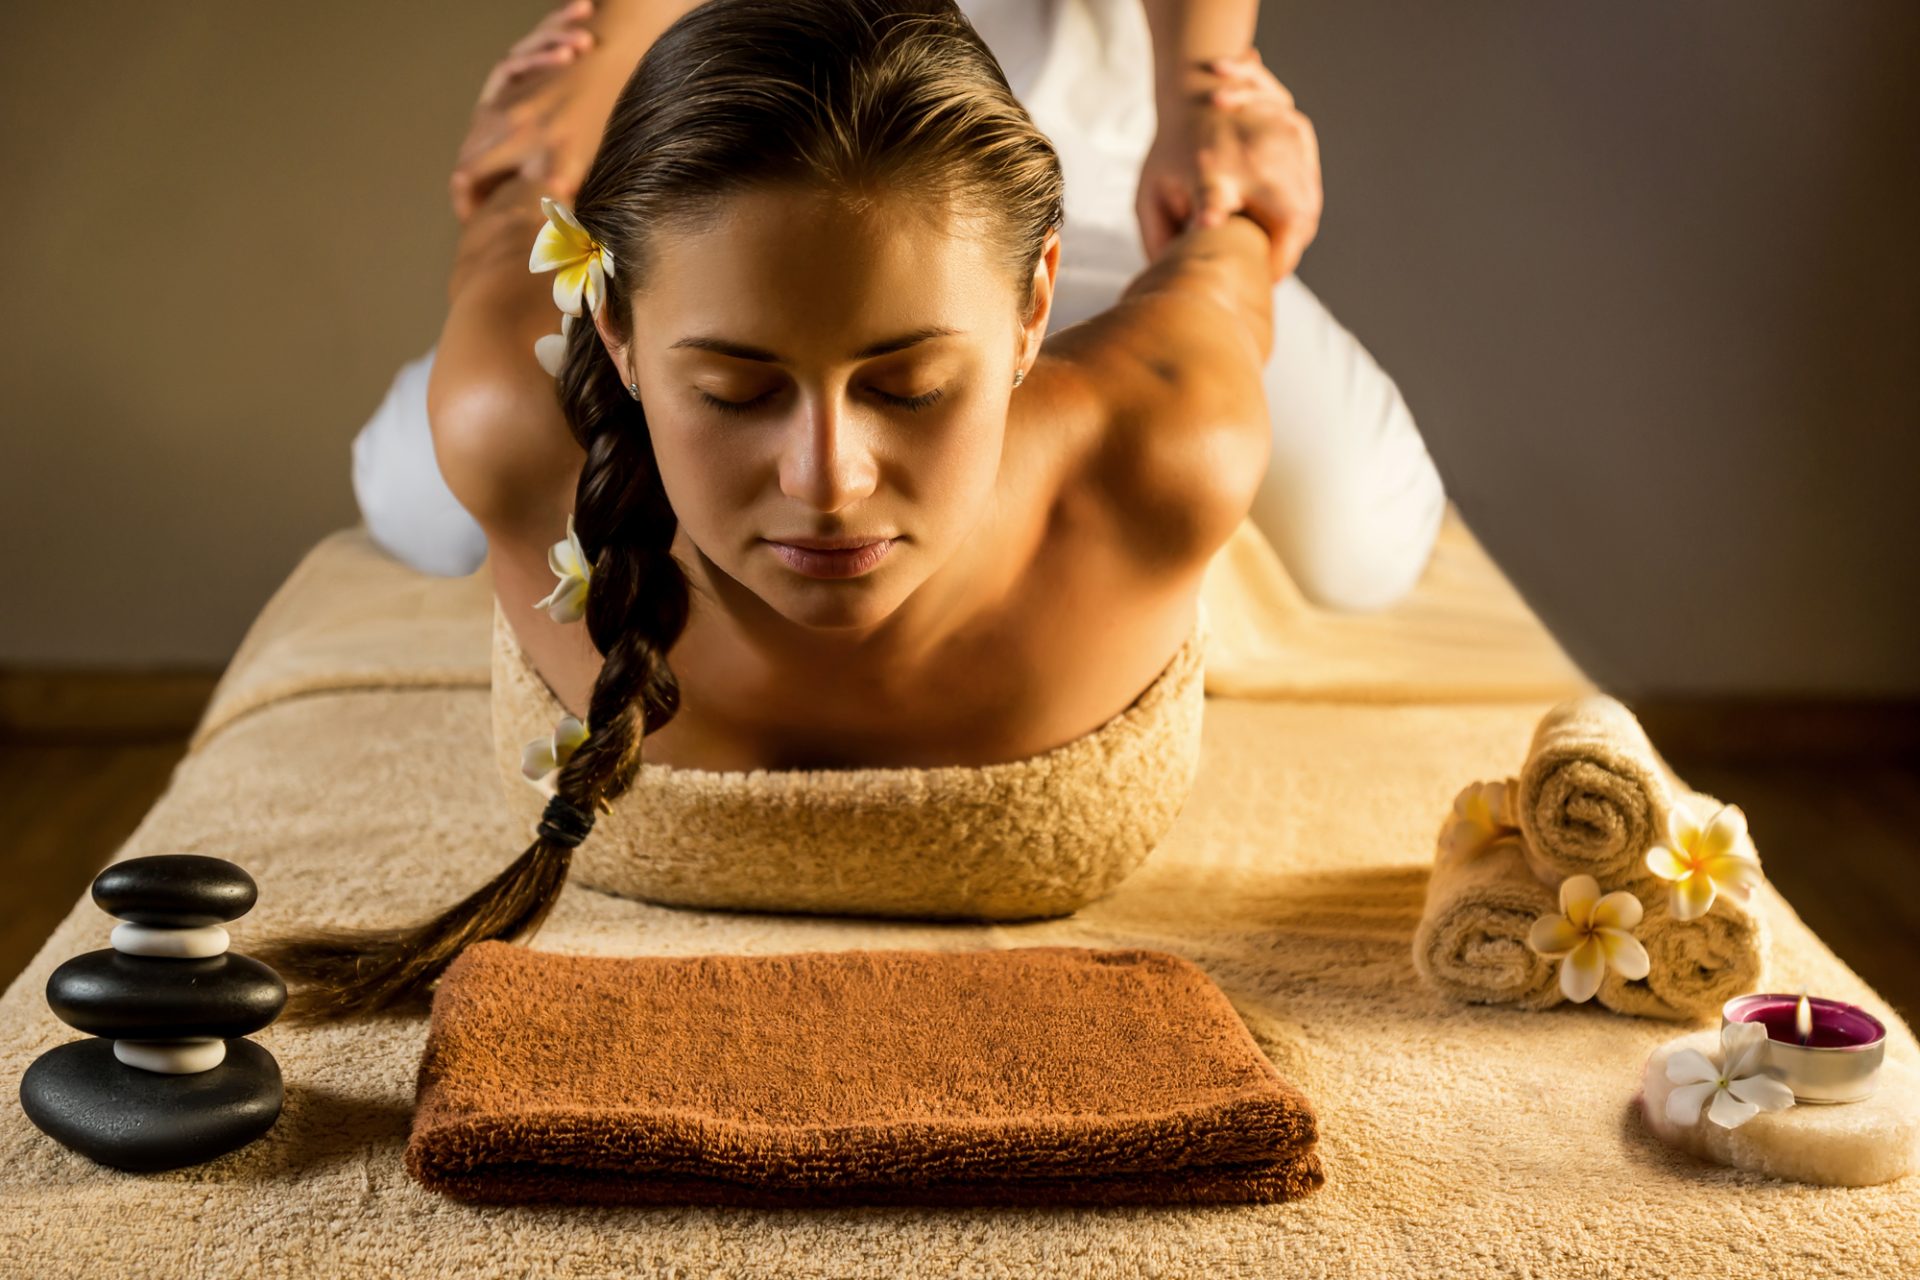 How to become a Thai massage therapist